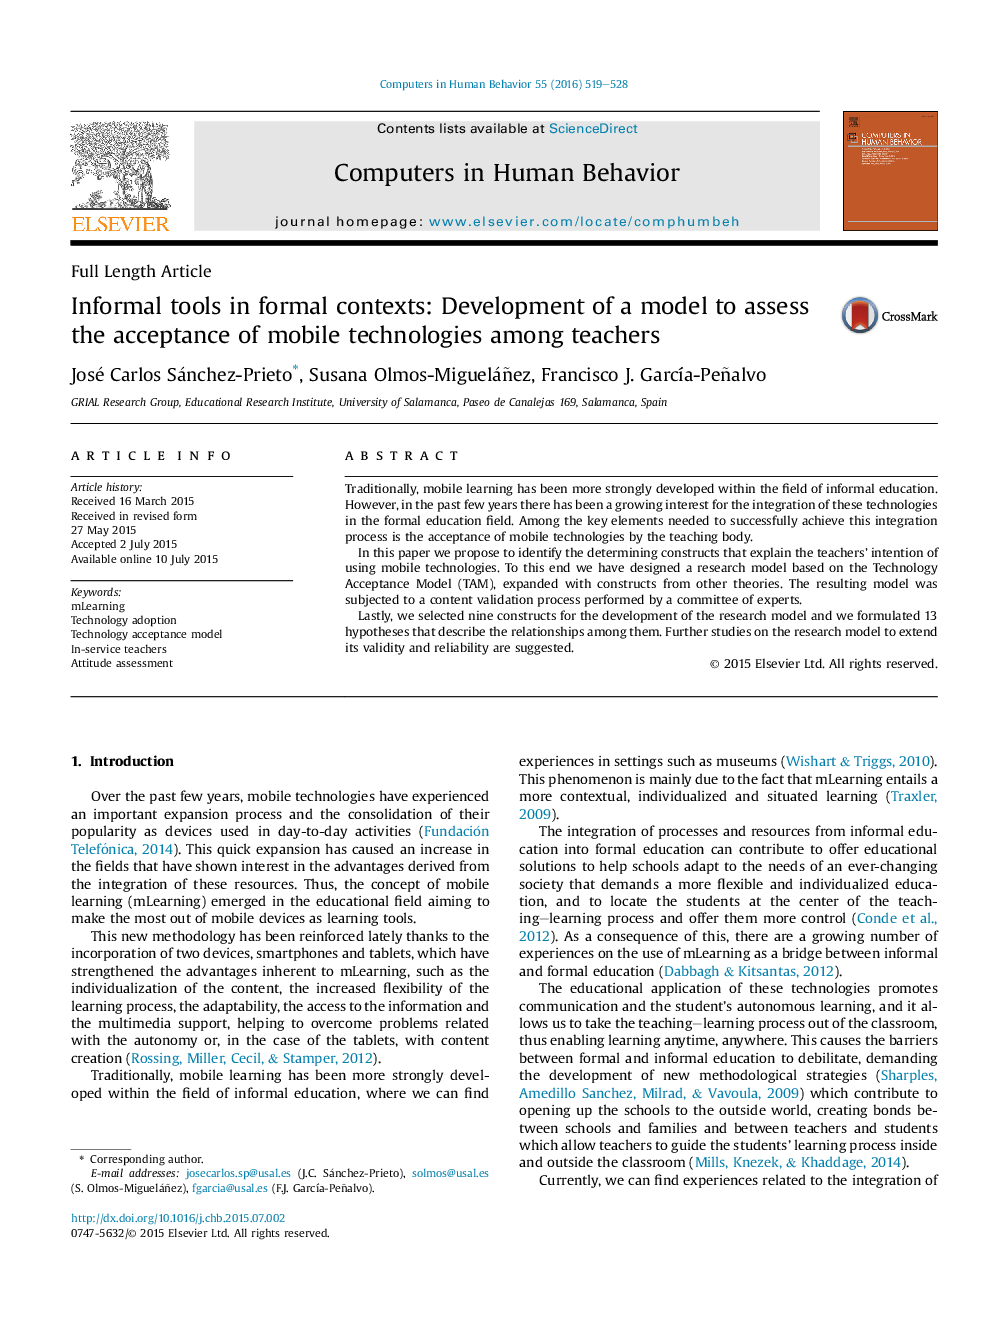 Informal tools in formal contexts: Development of a model to assess the acceptance of mobile technologies among teachers